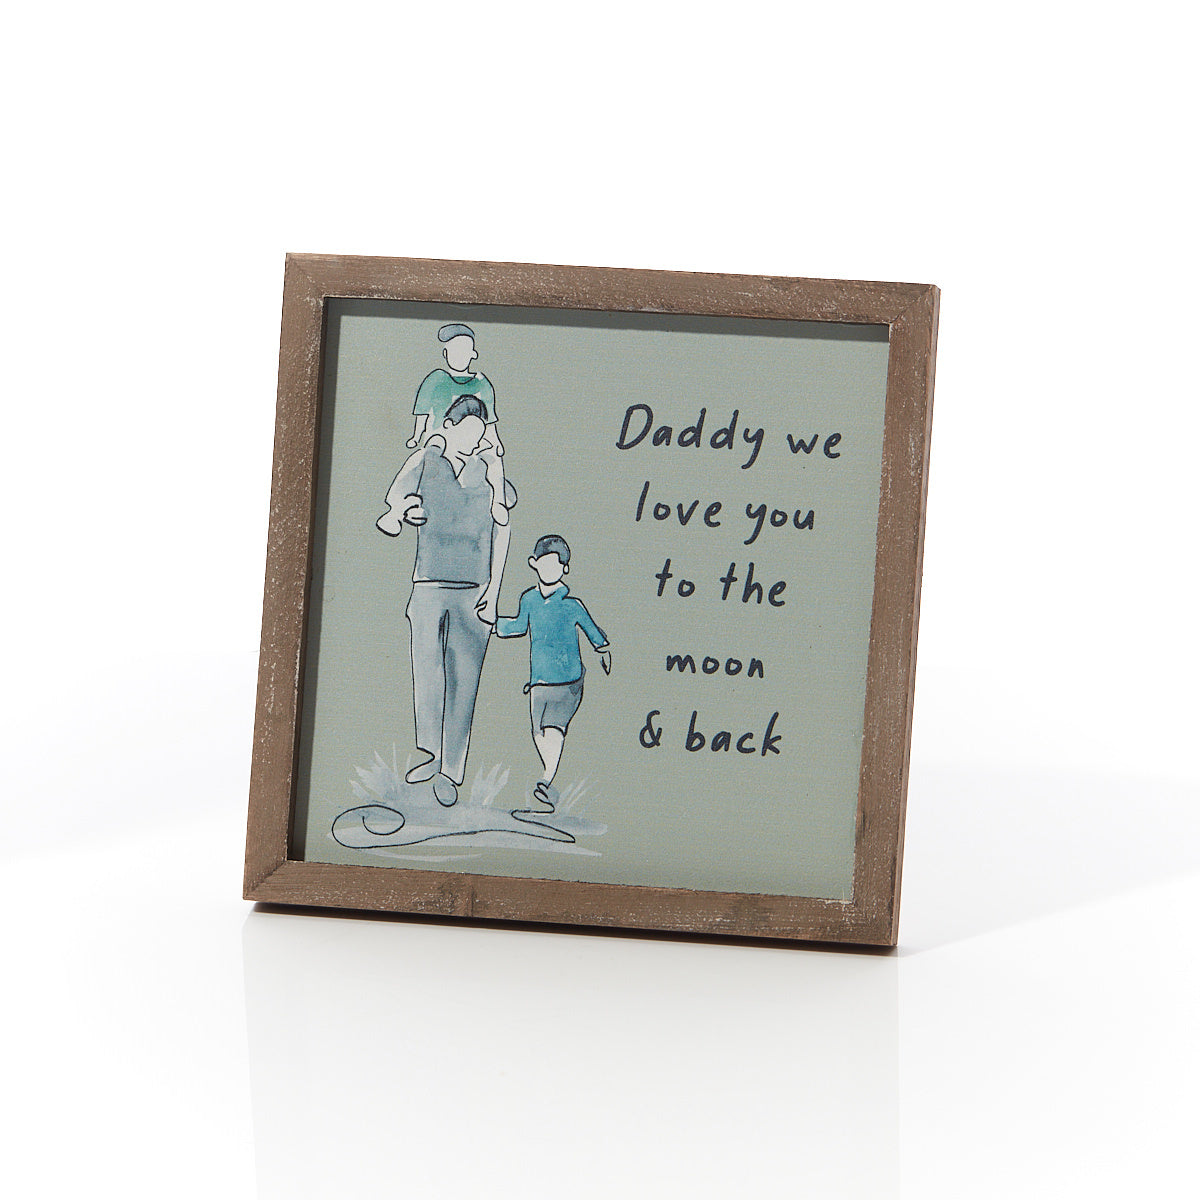 Daddy My Hero Wooden Easel